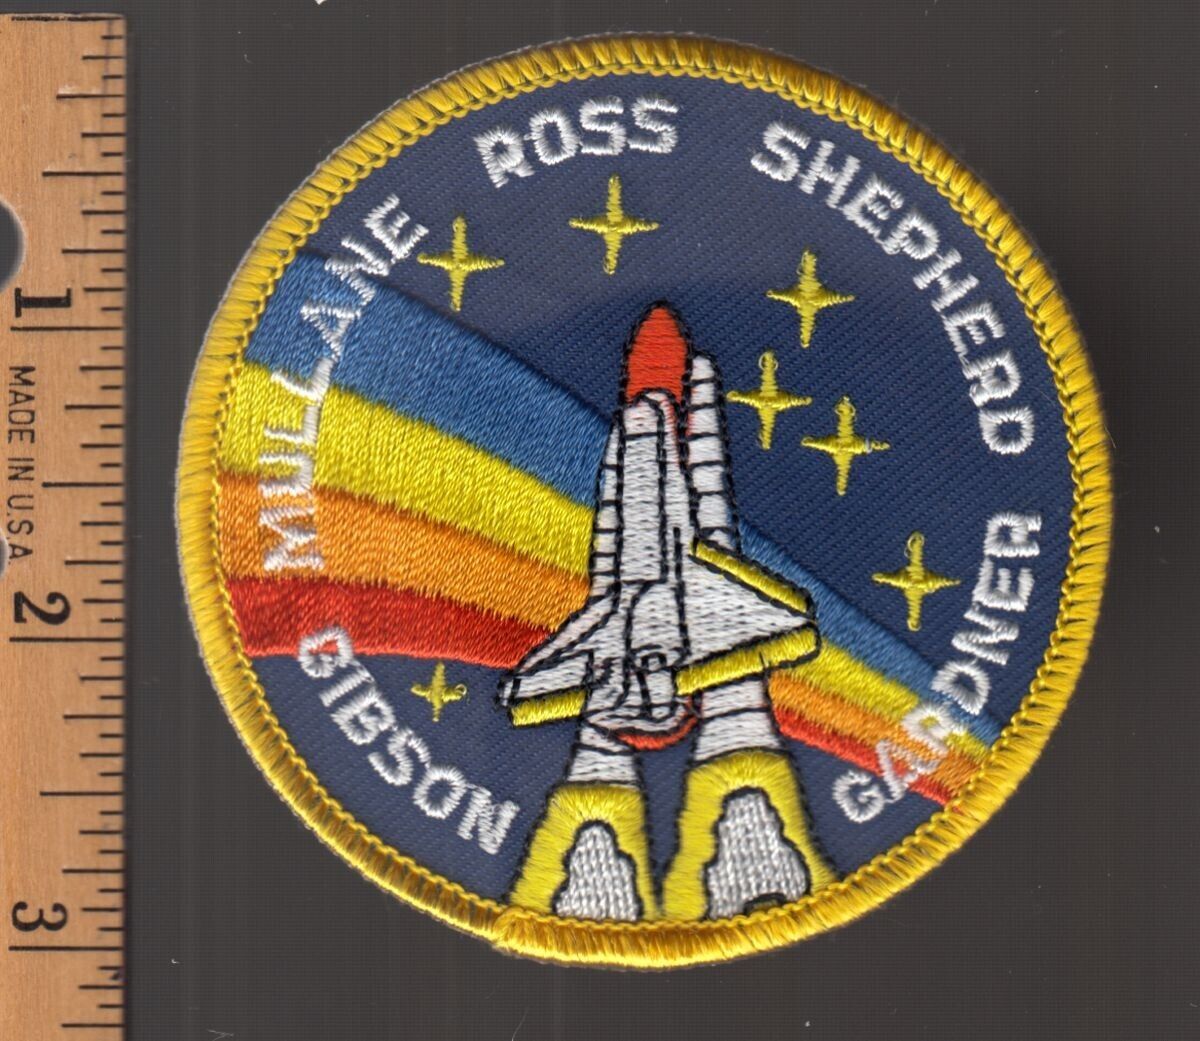 1988 Shuttle Atlantis STS-27R embroidered patch Gibson Ross Shepherd (A10